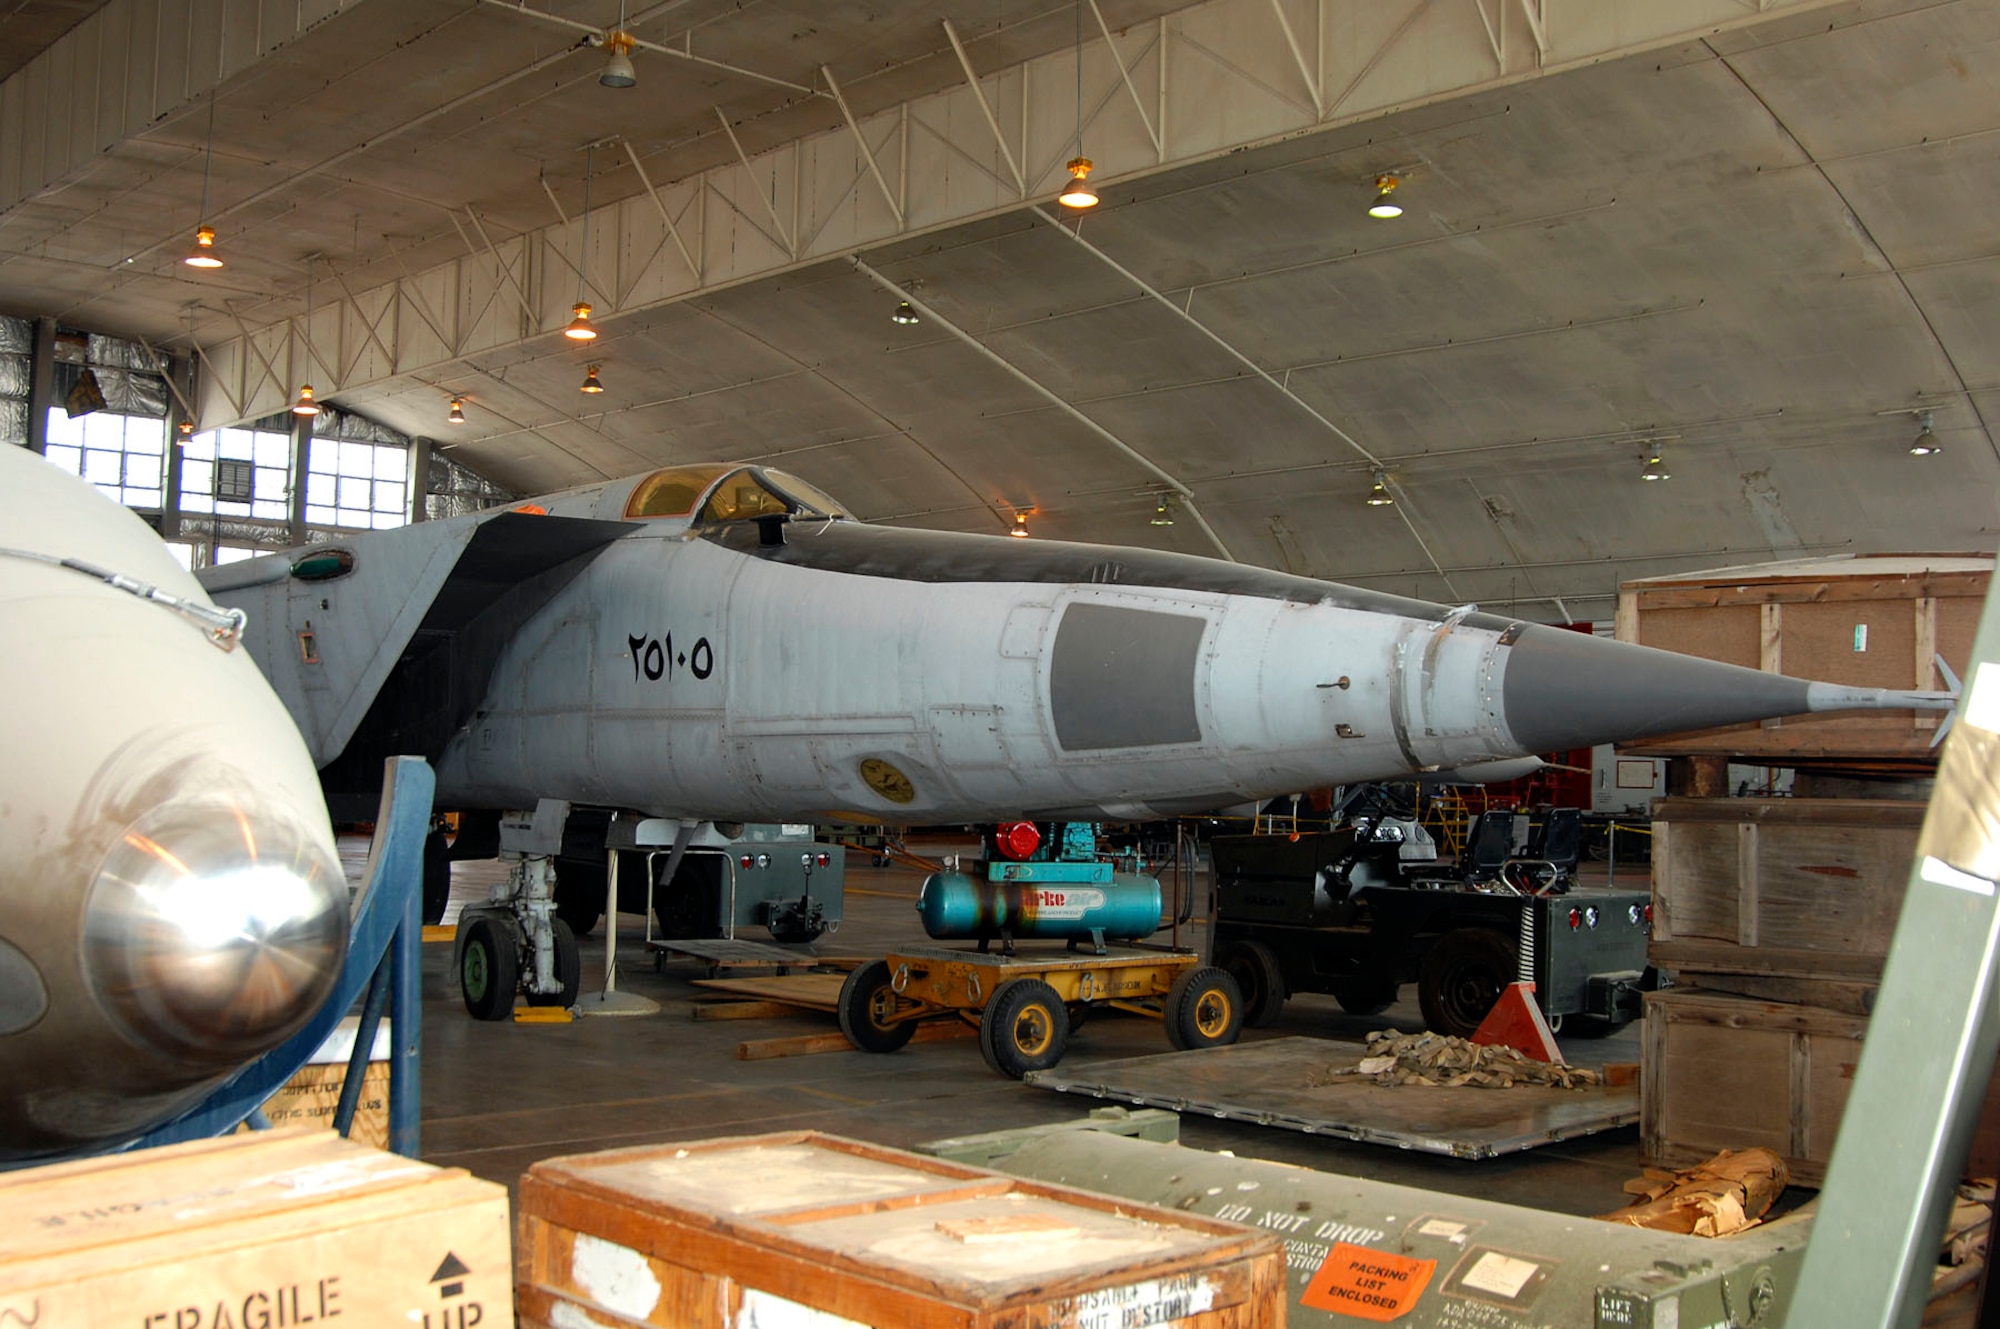 DAYTON, Ohio -- MiG 25 in the restoration area at the National Museum of the U.S. Air Force. (U.S. Air Force photo)